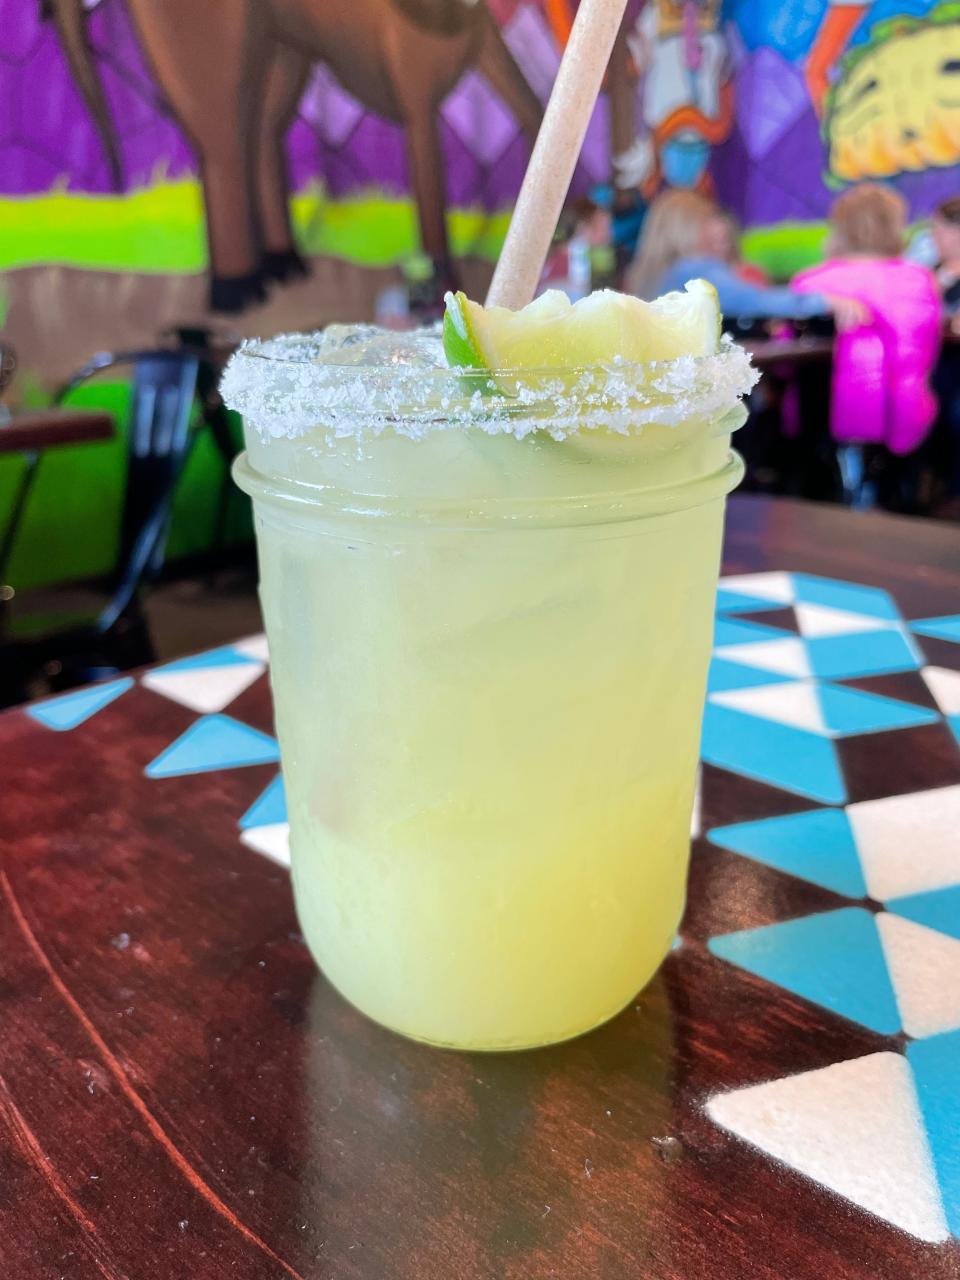 You can enjoy inventively flavorful margaritas and tequila in a fanciful and colorful setting at Condado Tacos in Turkey Creek.